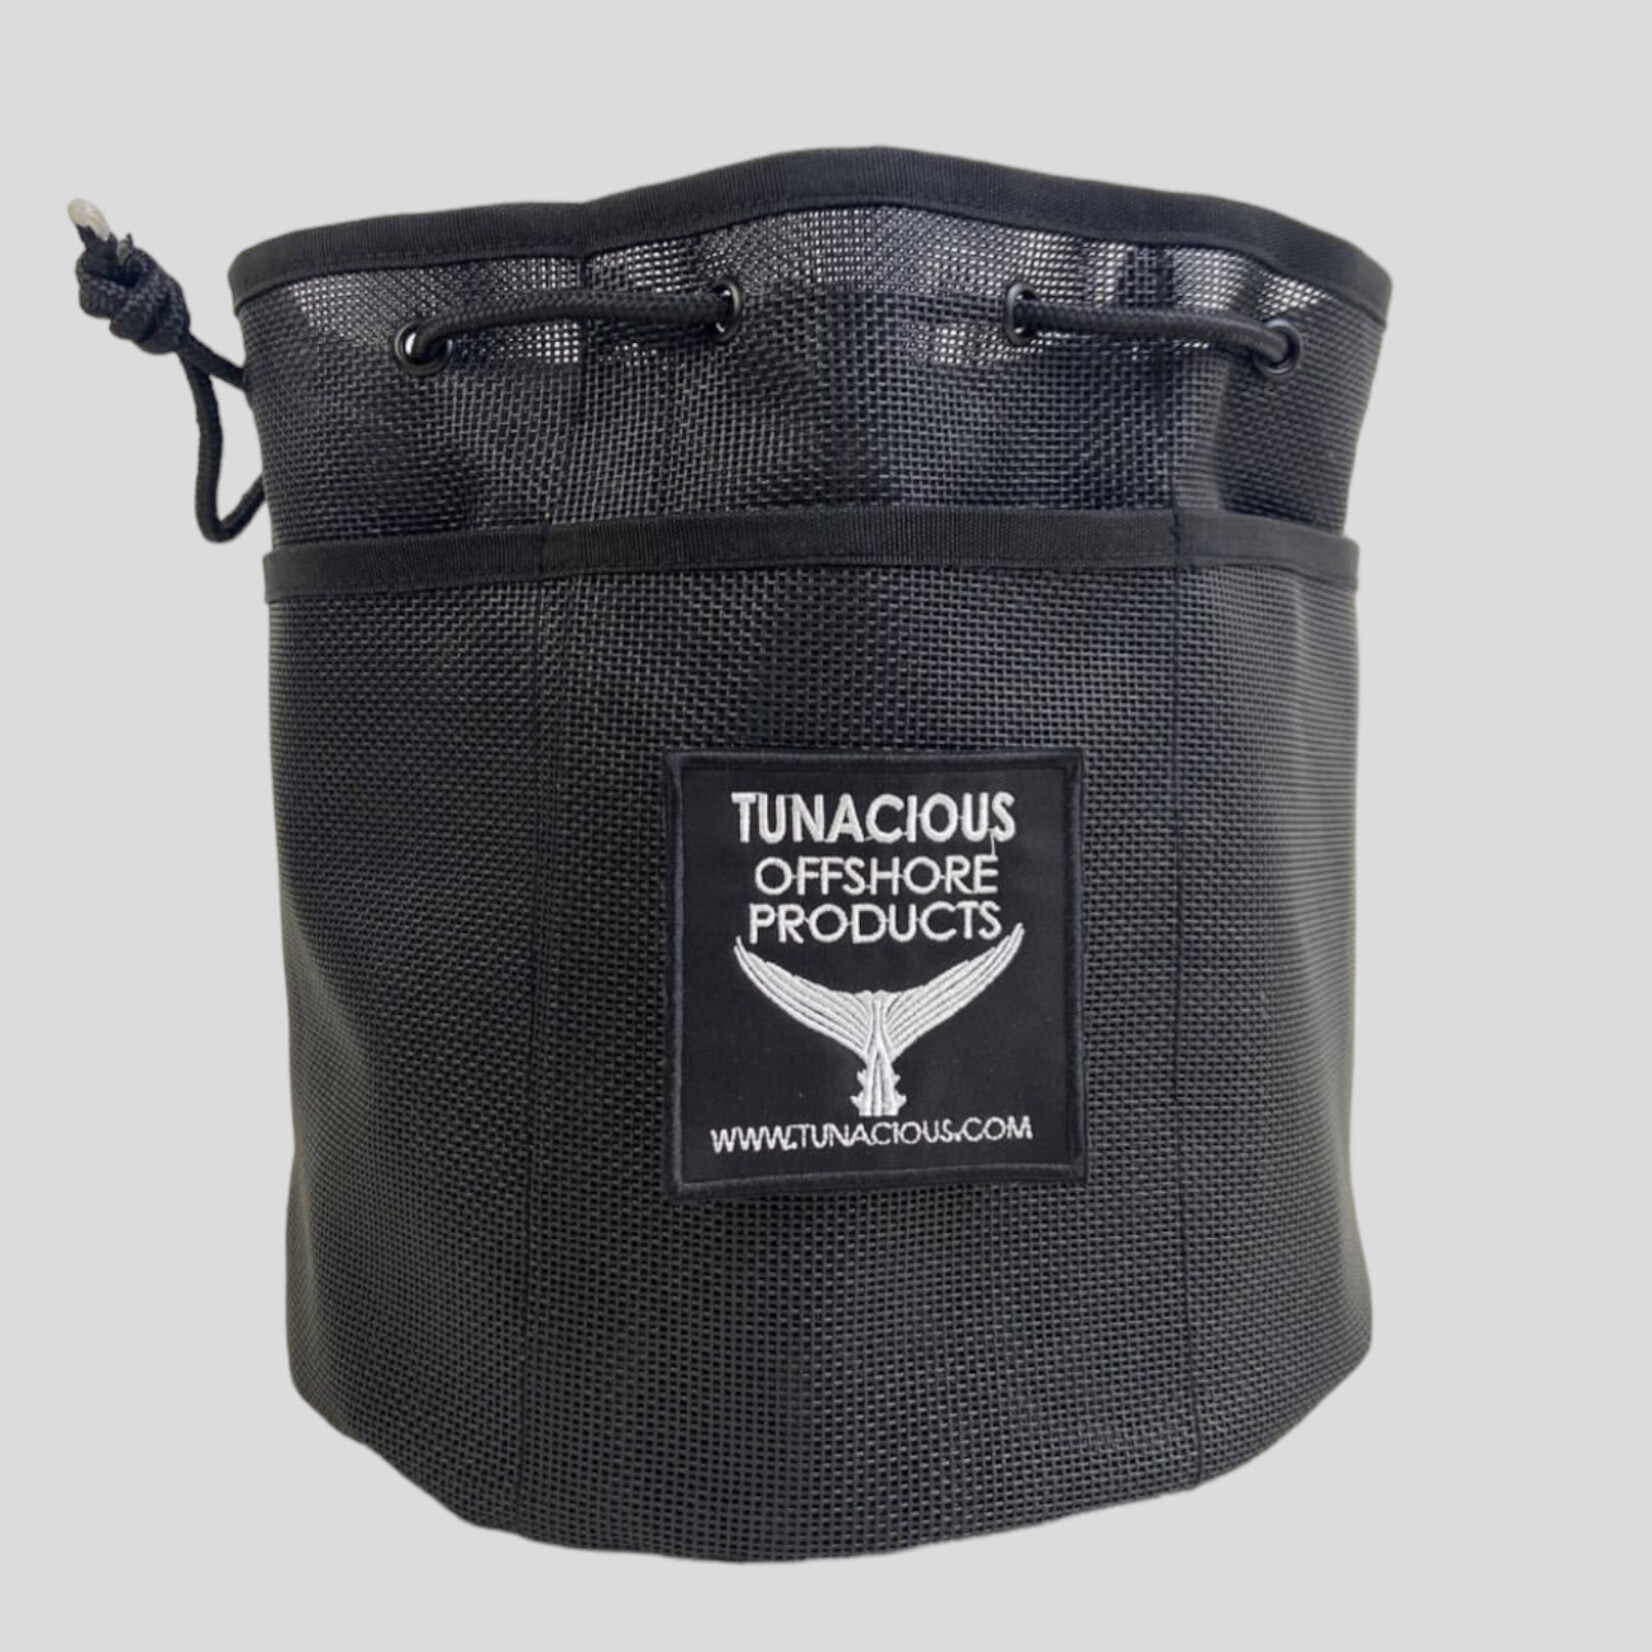 Outside Set Products Tunacious Mesh Weight Bag